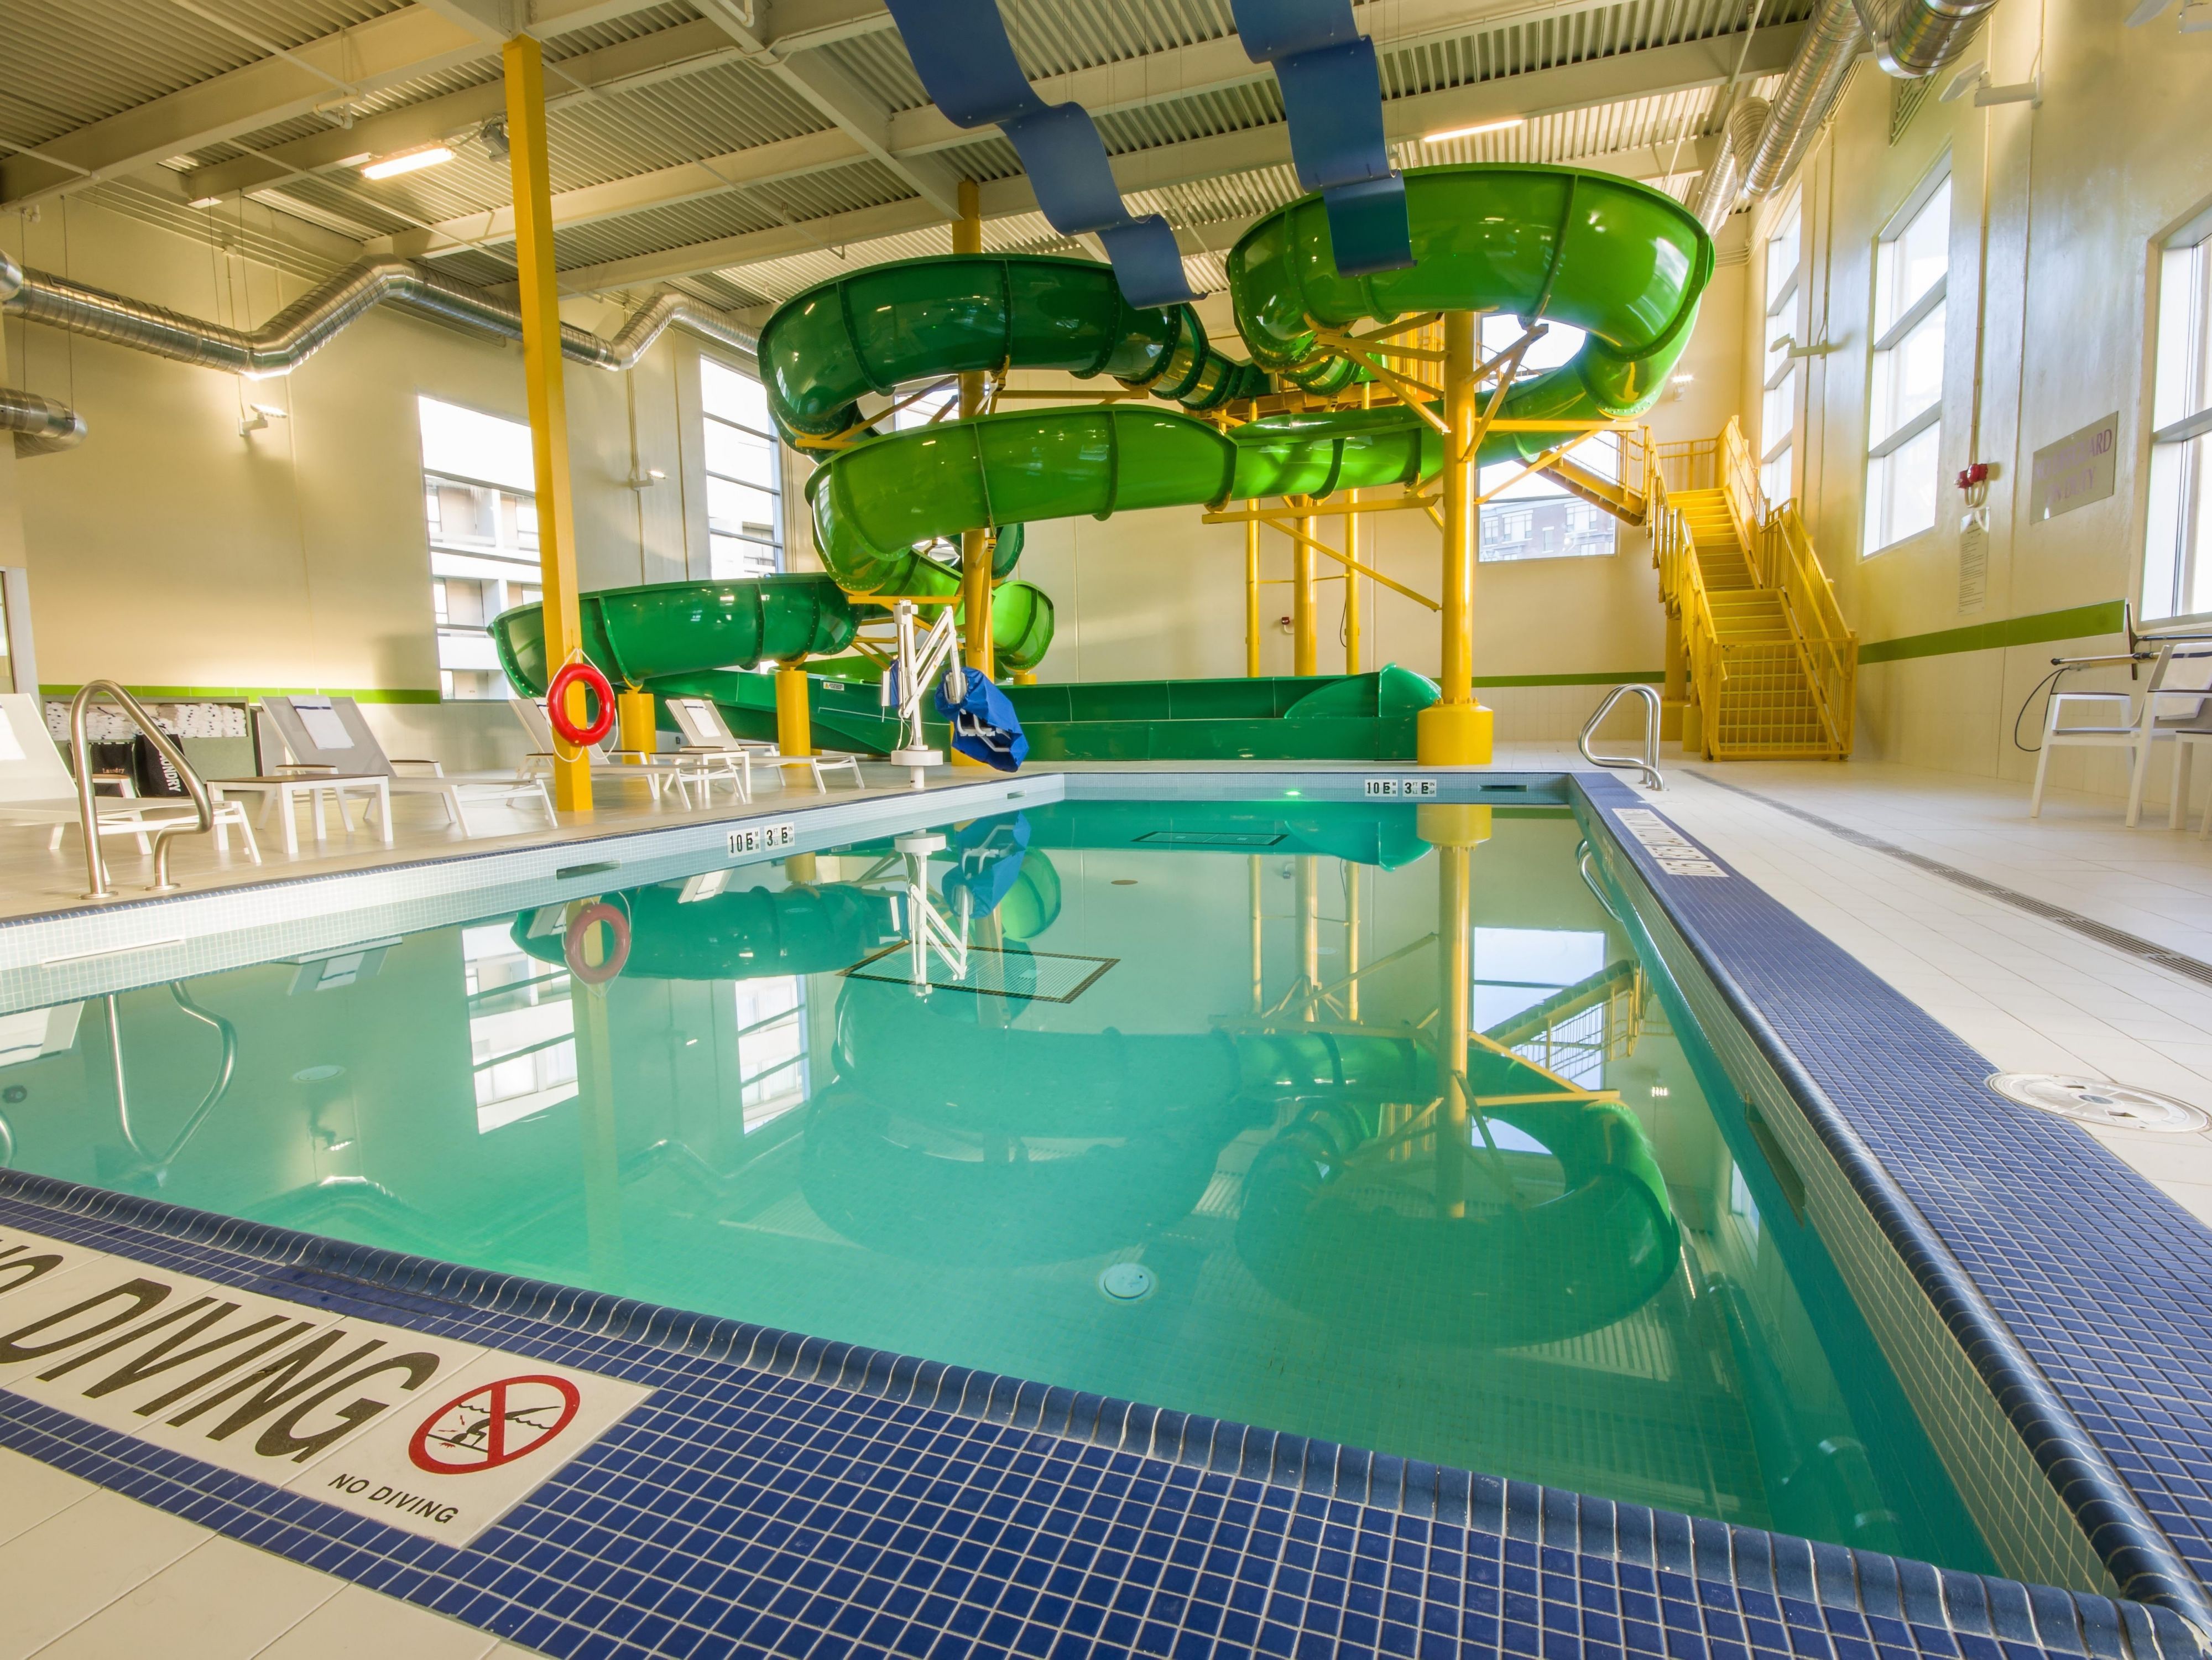 Fun for the whole family! Make a splash in our pool area that features two 165 foot watersides and an indoor swimming pool. Water slide is closed Monday to Thursday 
Water slide open only on weekend ( friday , saturday, sunday )  only 